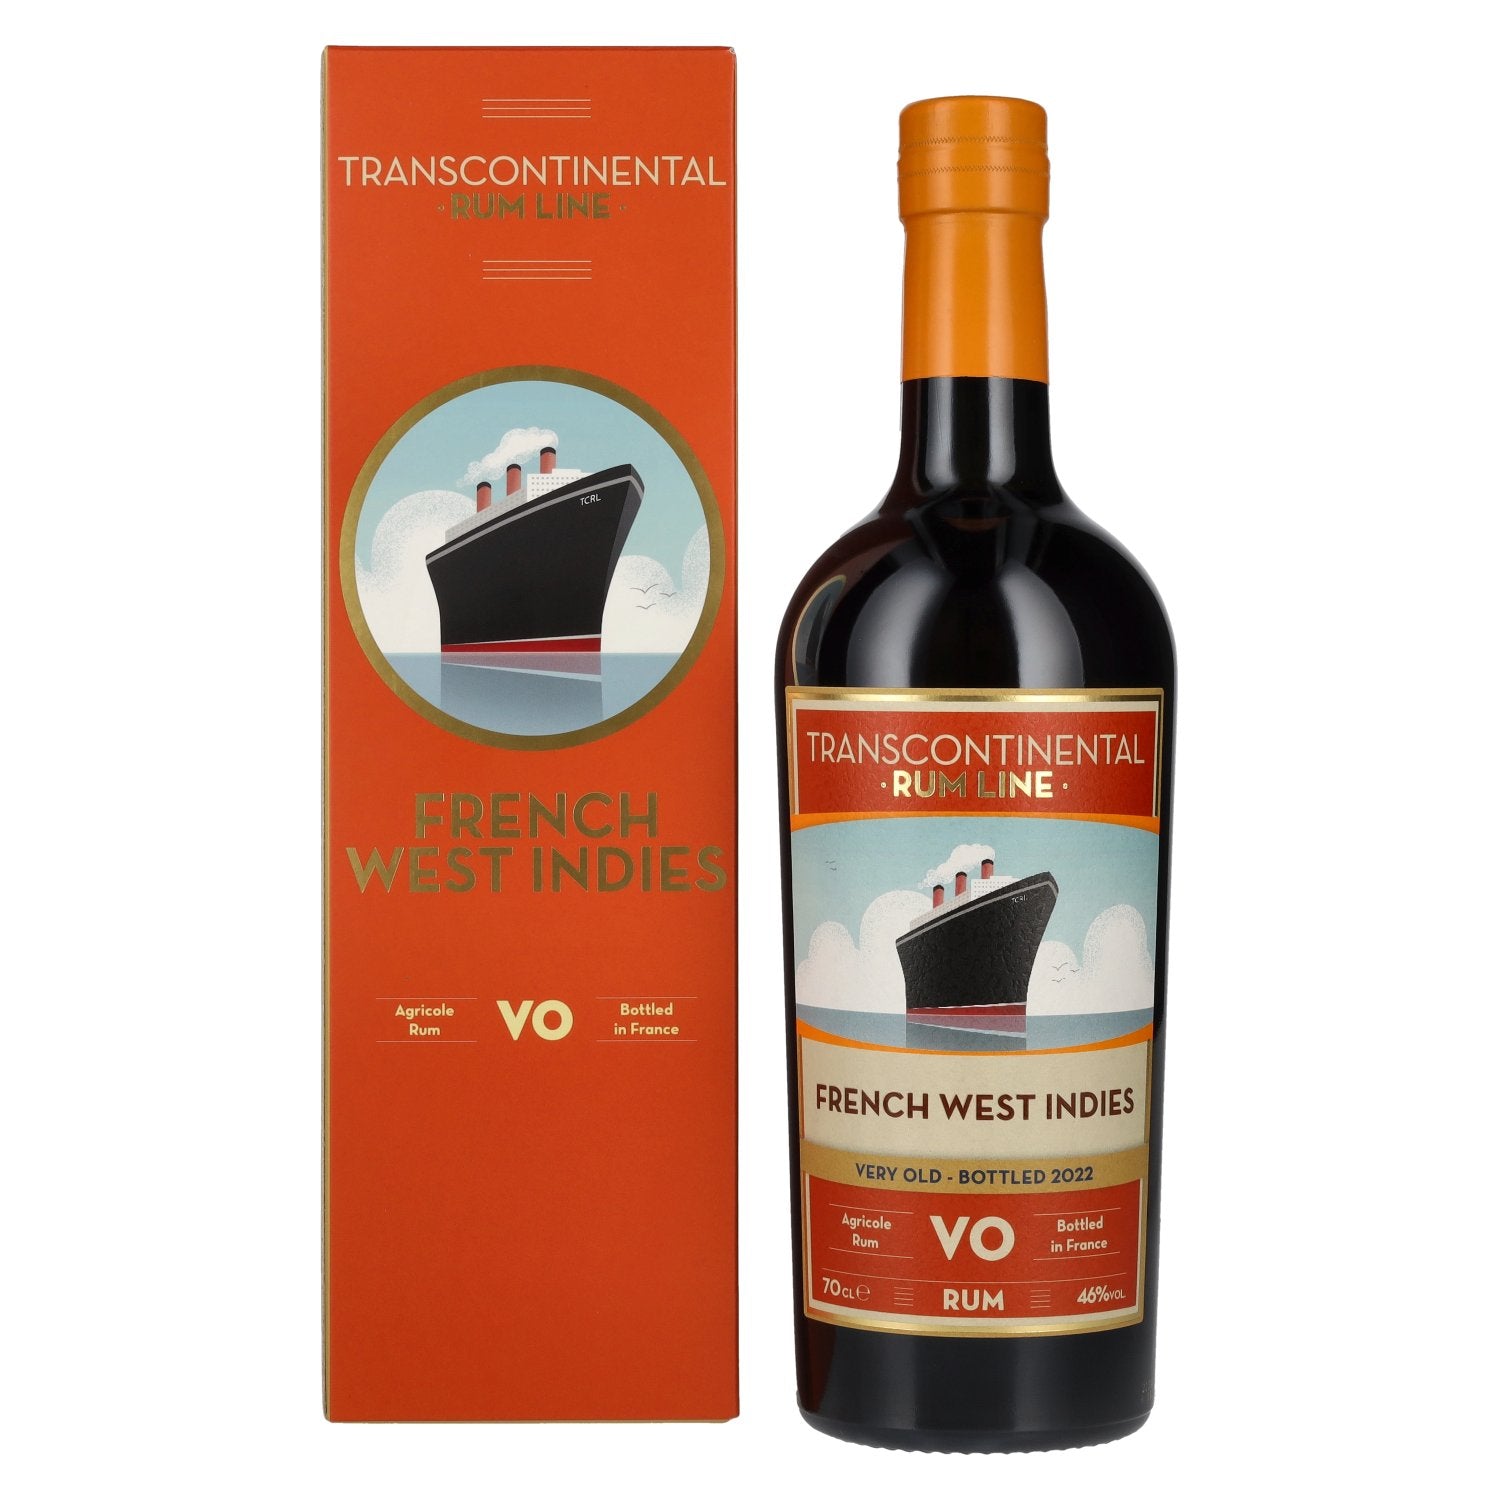 Transcontinental Rum Line FRENCH WEST INDIES VO Rum 2022 46% Vol. 0,7l in Giftbox